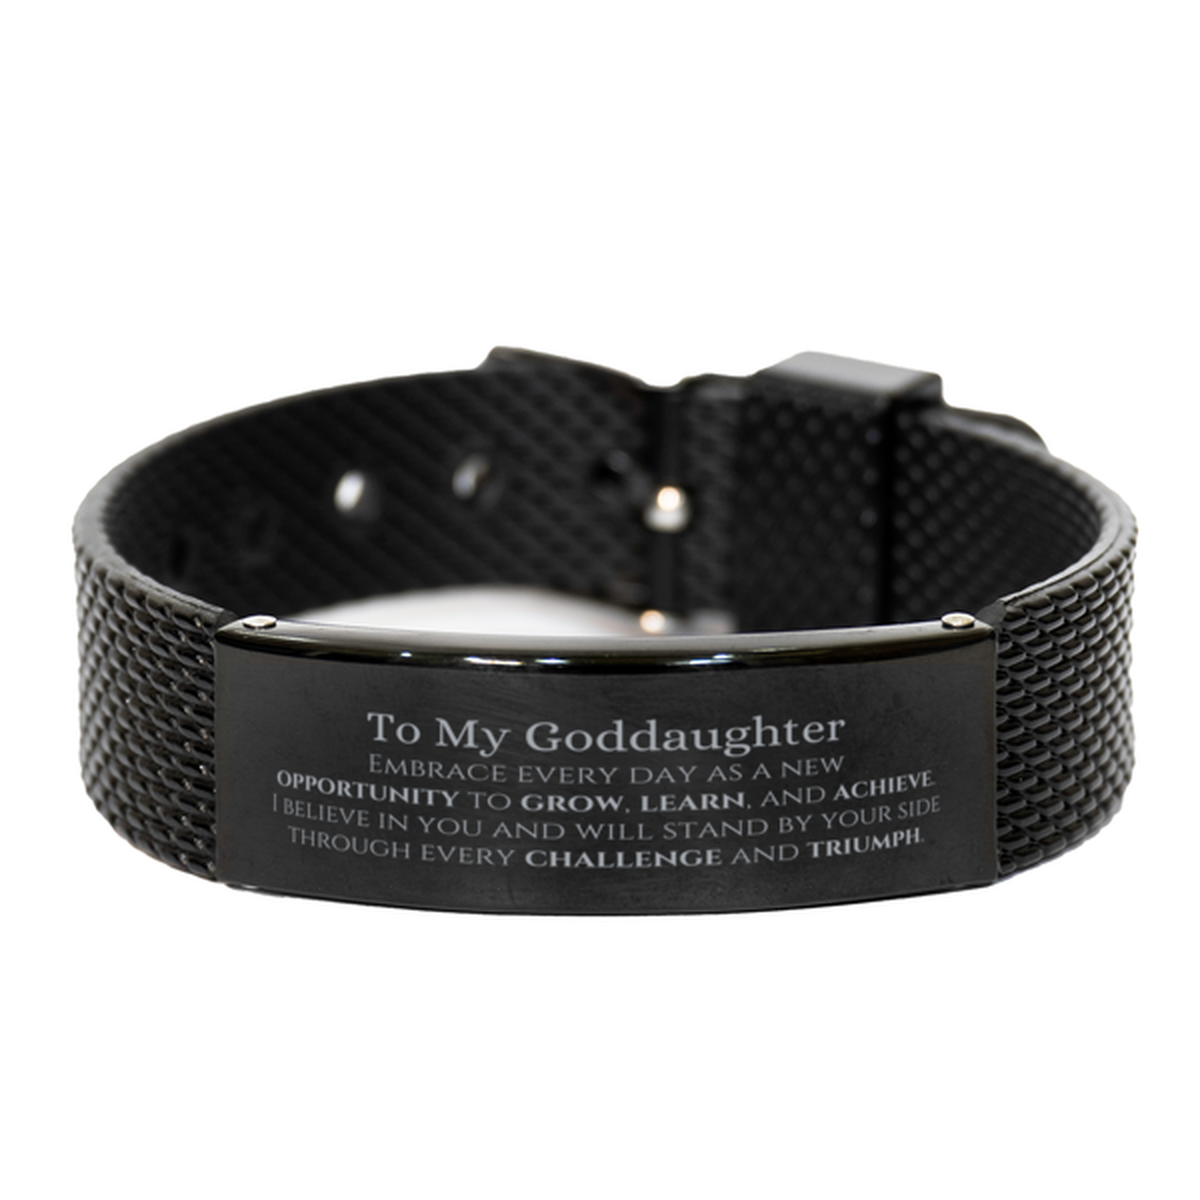 To My Goddaughter Gifts, I believe in you and will stand by your side, Inspirational Black Shark Mesh Bracelet For Goddaughter, Birthday Christmas Motivational Goddaughter Gifts